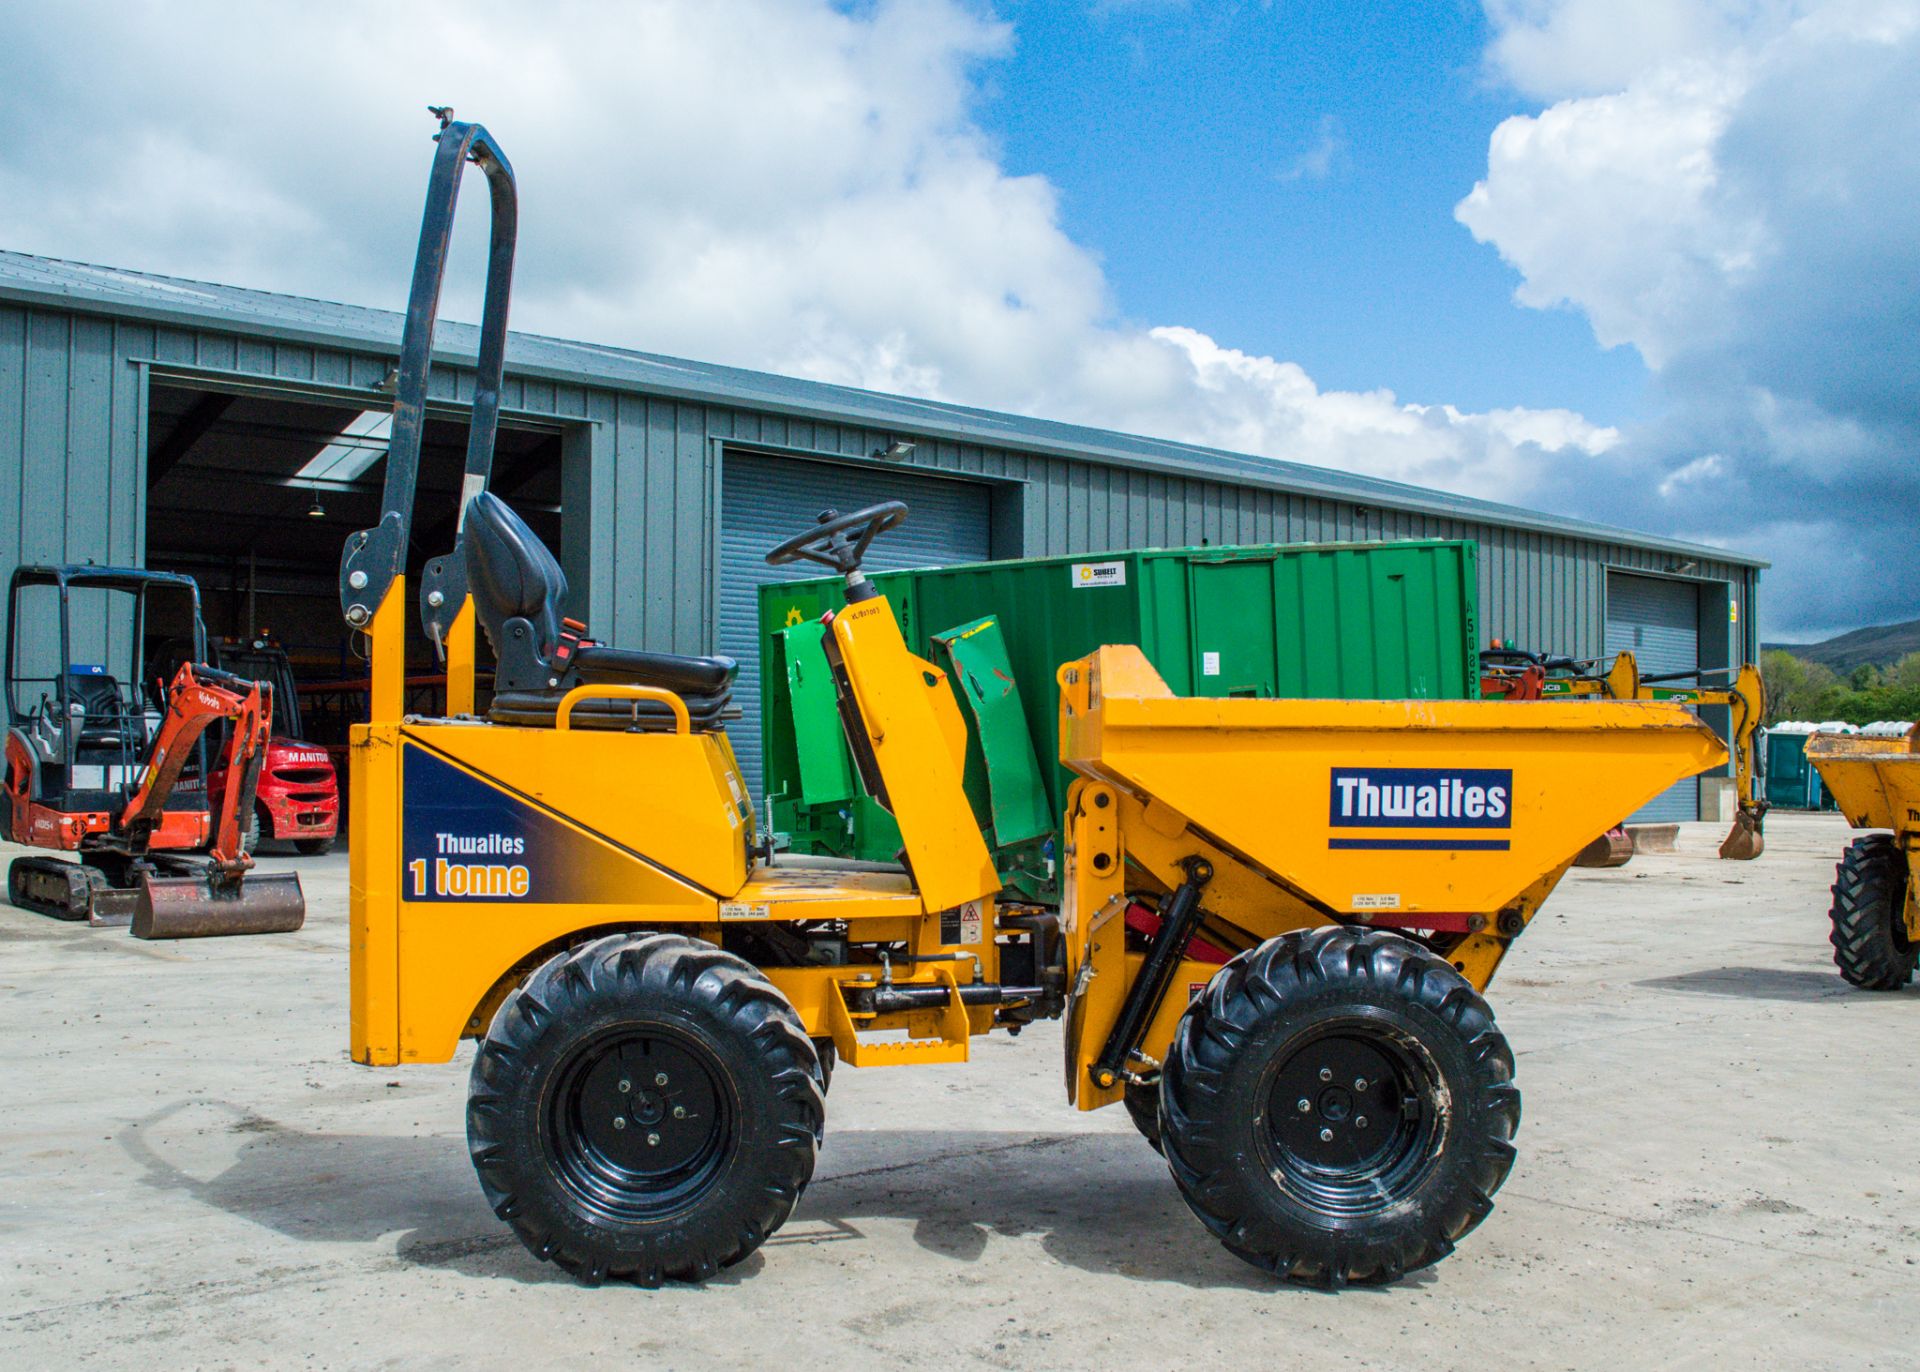 Thwaites 1 tonne high tip dumper Year: 2018 S/N: E3649 Recorded hours: 441 XL187003 - Image 8 of 21